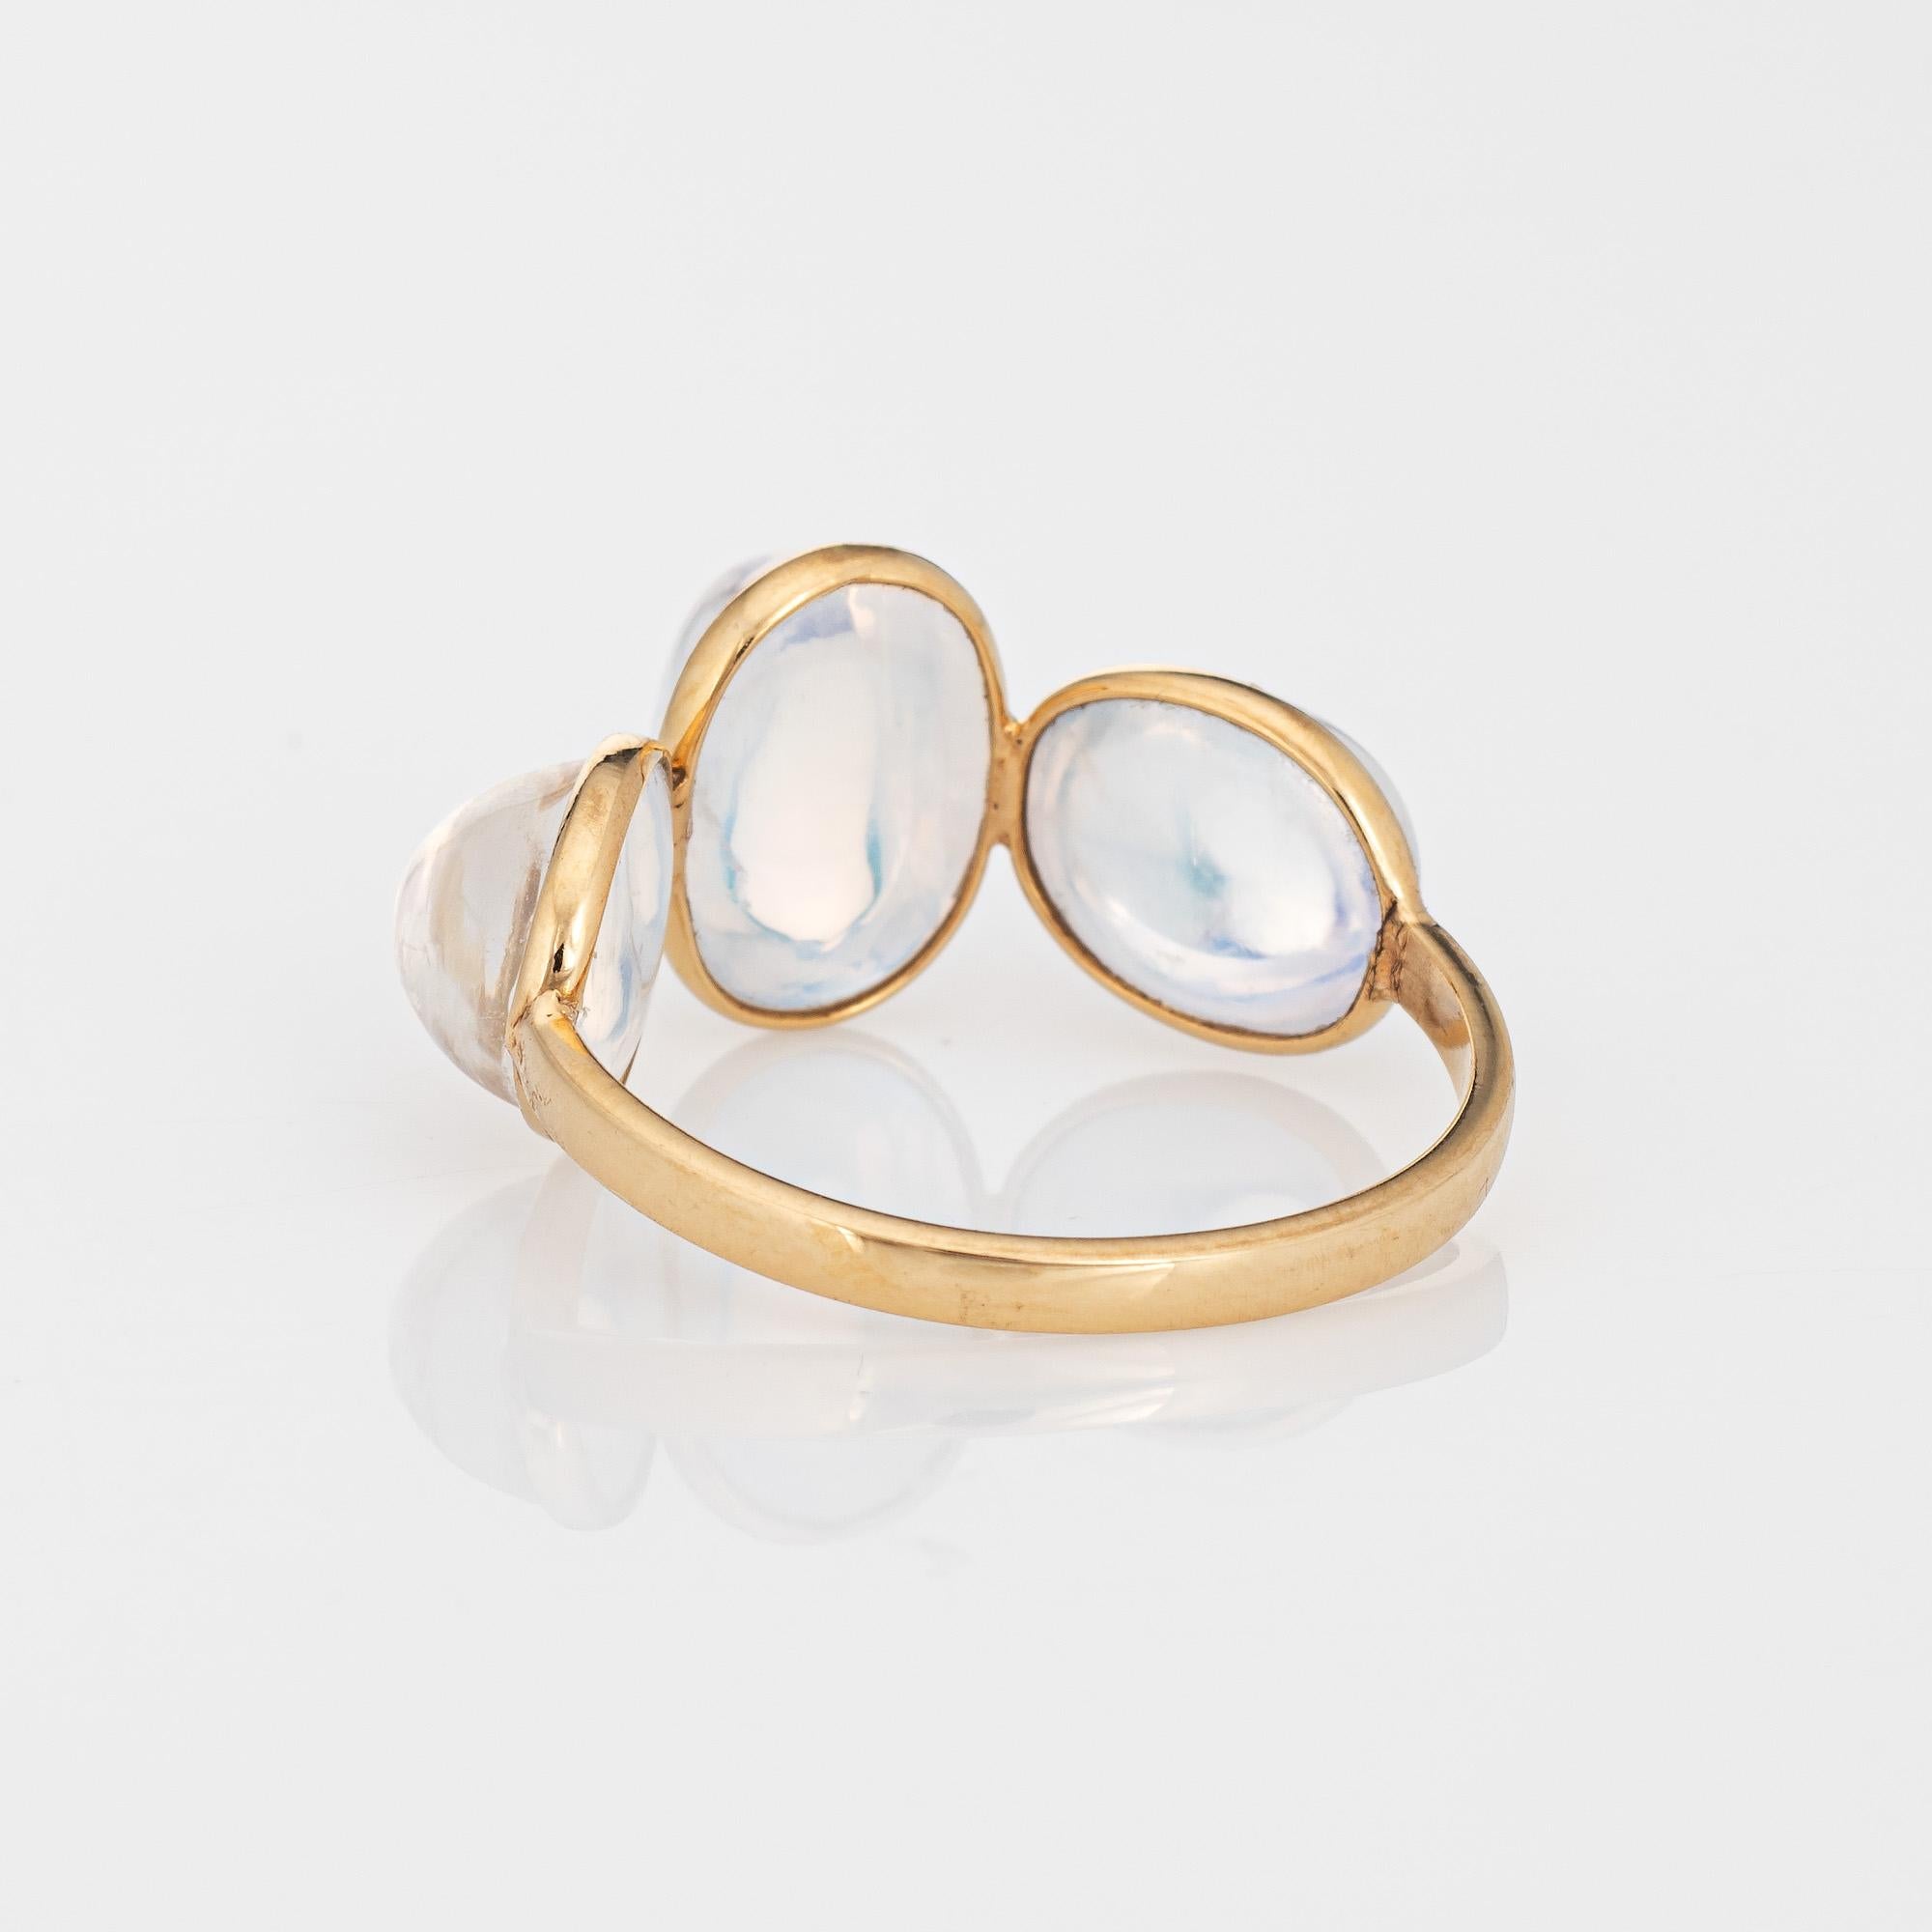 Rainbow Moonstone Ring Estate 18k Yellow Gold 3 Stone Band Fine Jewelry Sz 7 In Good Condition For Sale In Torrance, CA